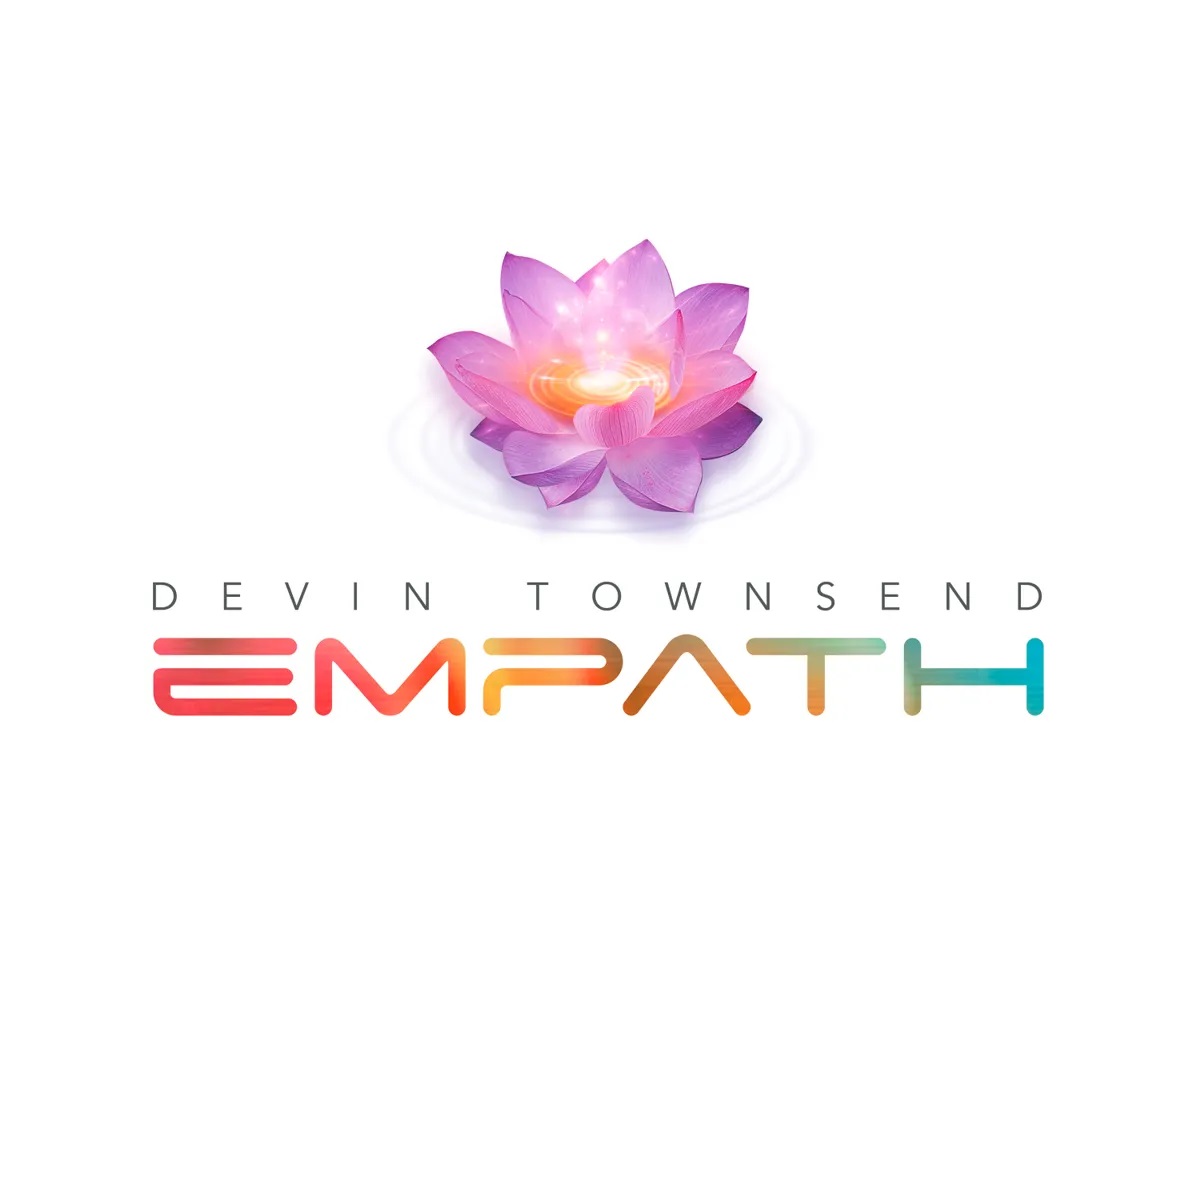 devin-townsend-empath-the-ultimate-edition-limited-deluxe-2cd-plus-2blu-ray-artbook.jpg